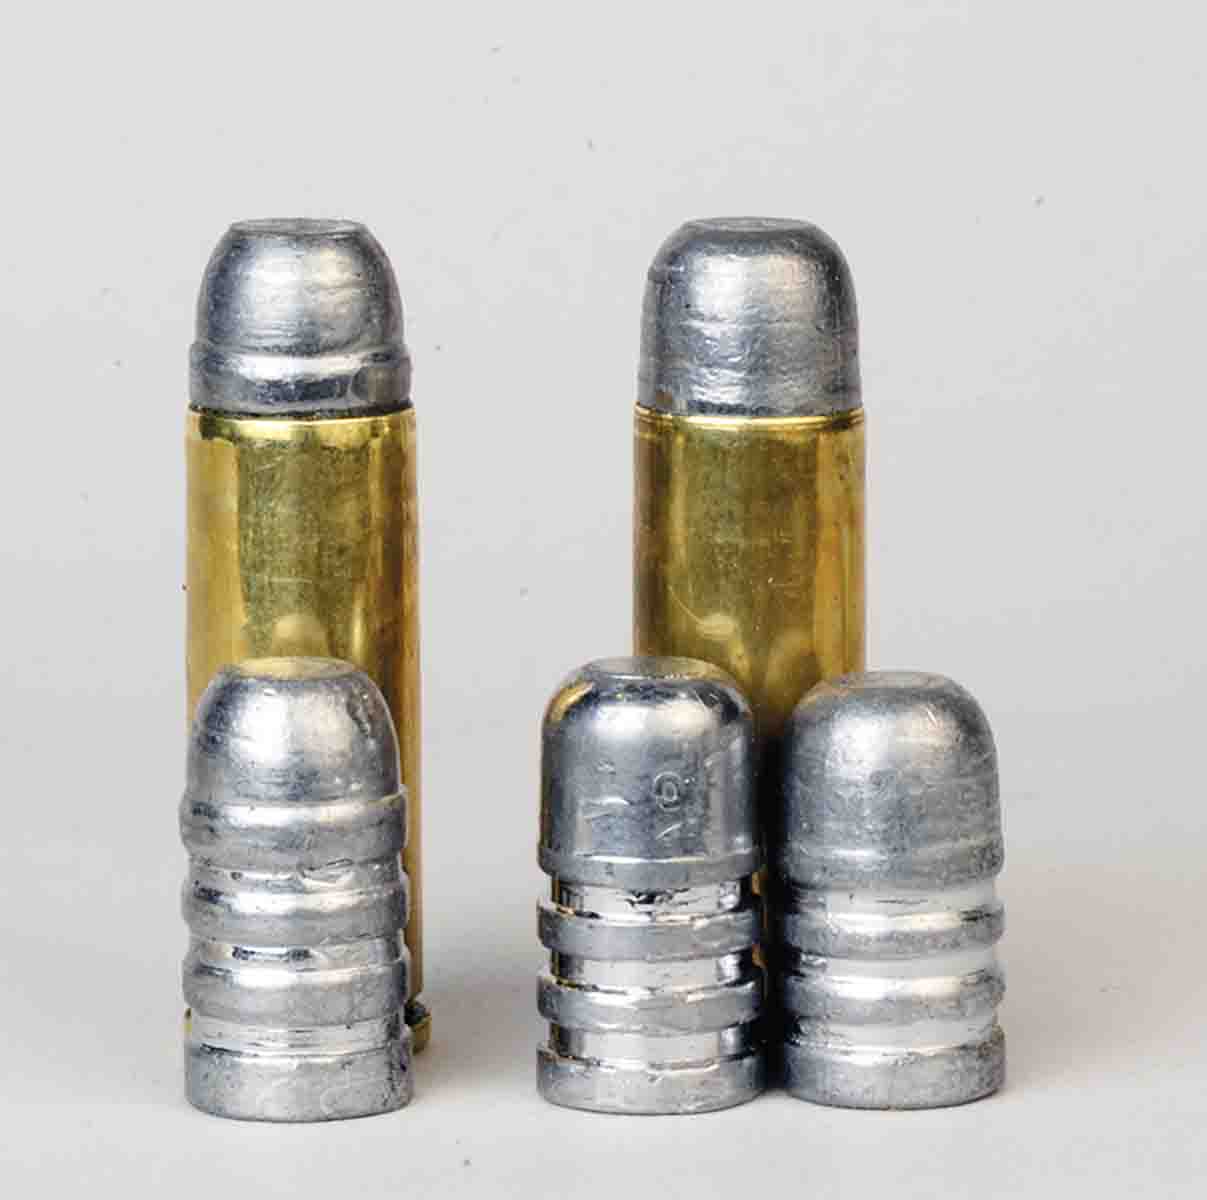 Mike used .41 Colt (Long) handloads with these bullets to gather data for the accompanying table. At left is a loaded round with Rapine mould 386-185HB. At right are hollowbase bullets from MP Molds 41LC (200 grains) and Lyman mould 386178 (185 grains). The loaded round carries the MP Molds bullet.